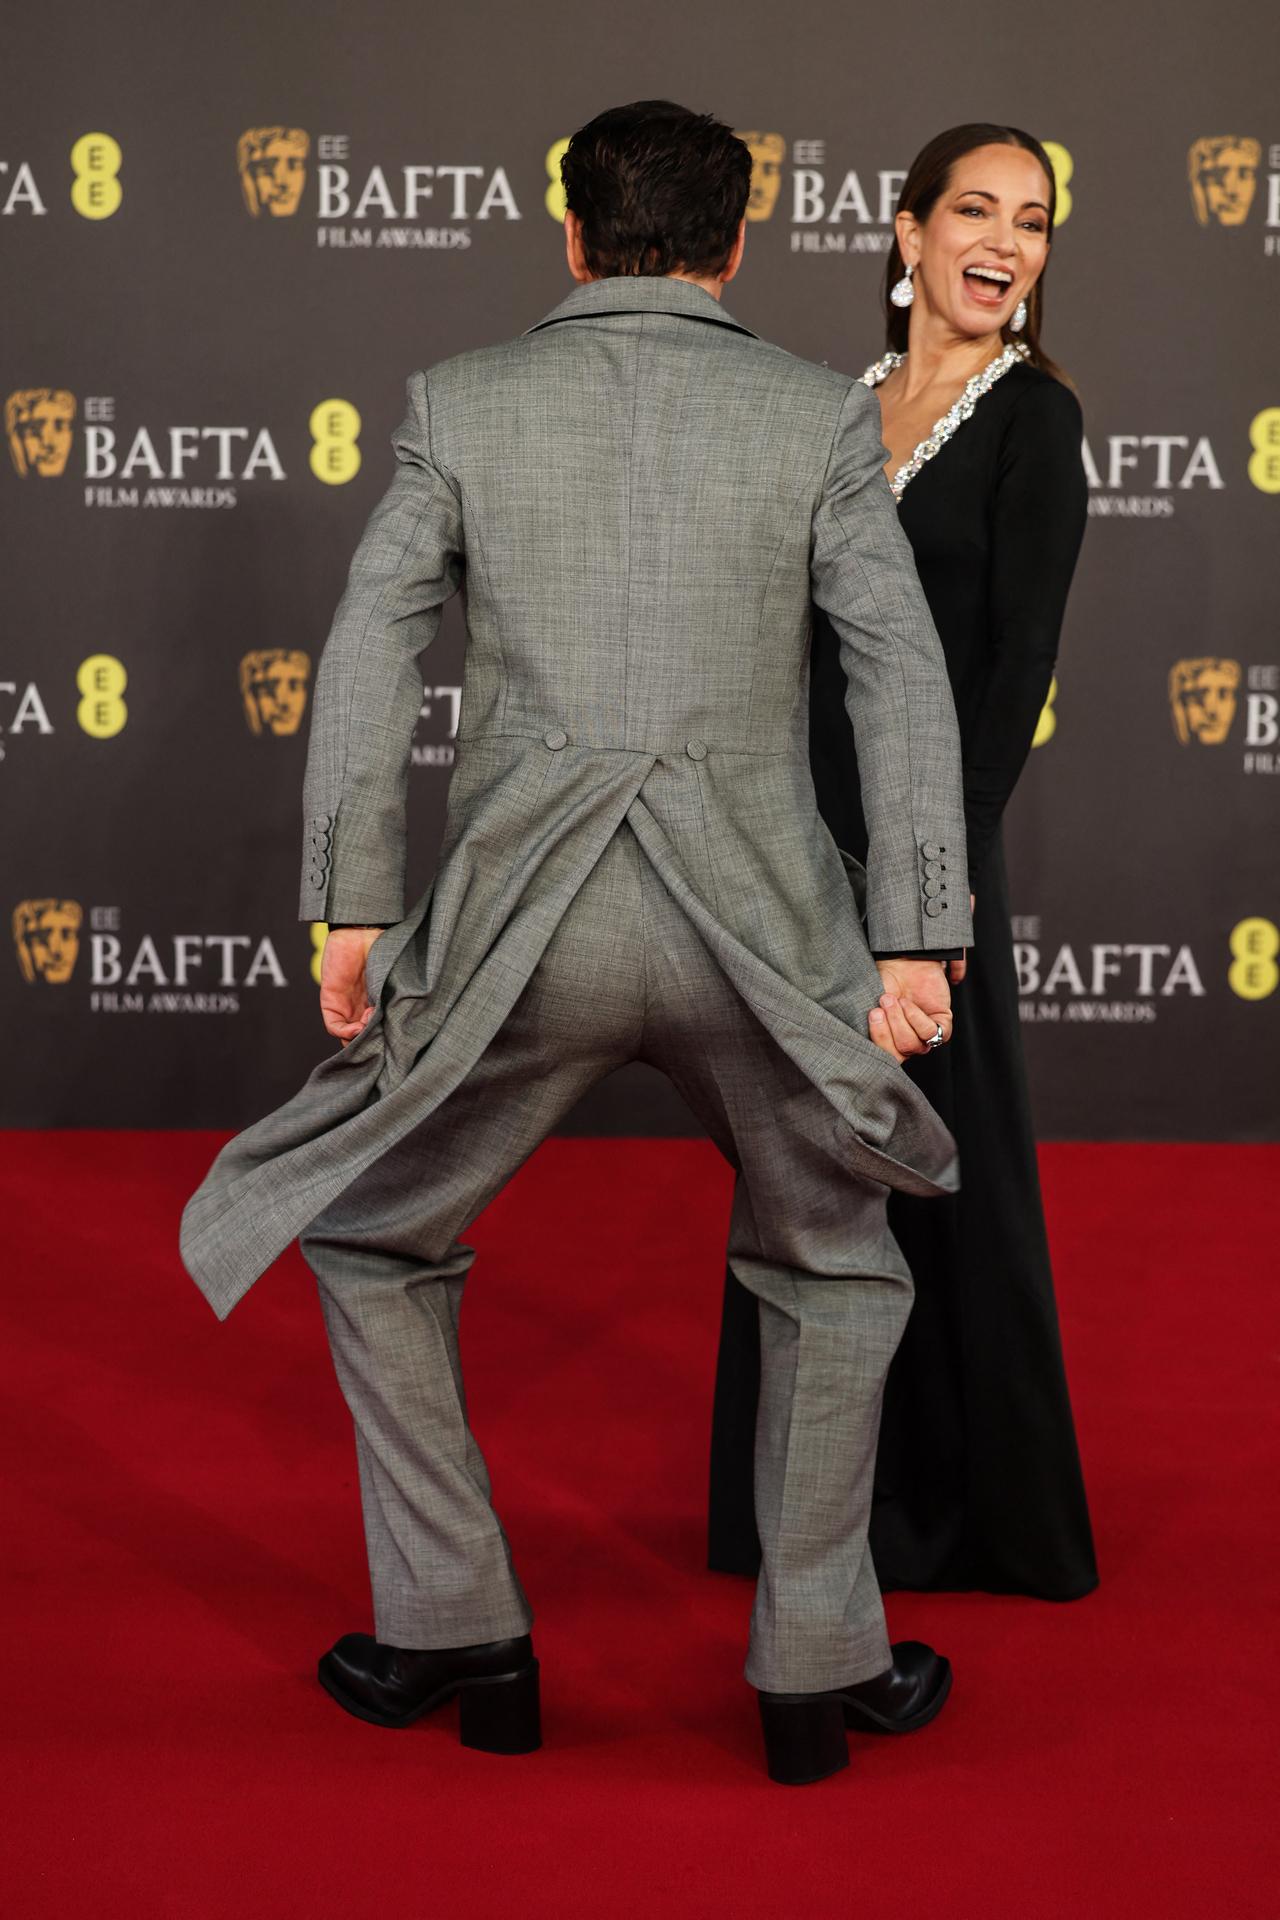 Robert and Susan engage in some banter with the paparazzi on the red carpet